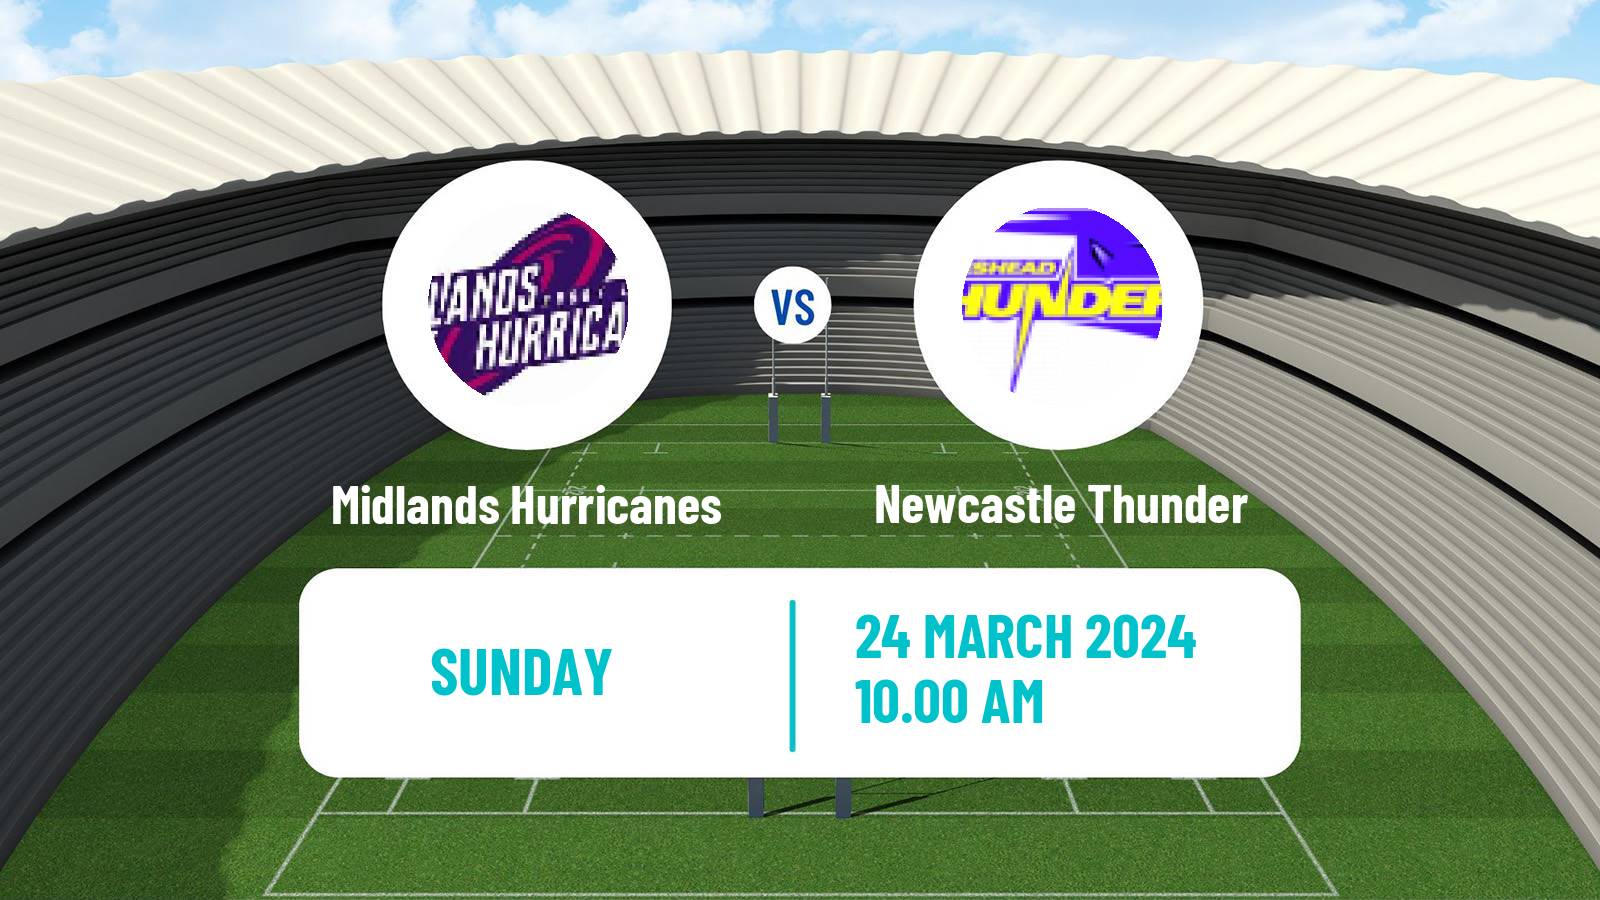 Rugby league English League 1 Rugby League Midlands Hurricanes - Newcastle Thunder